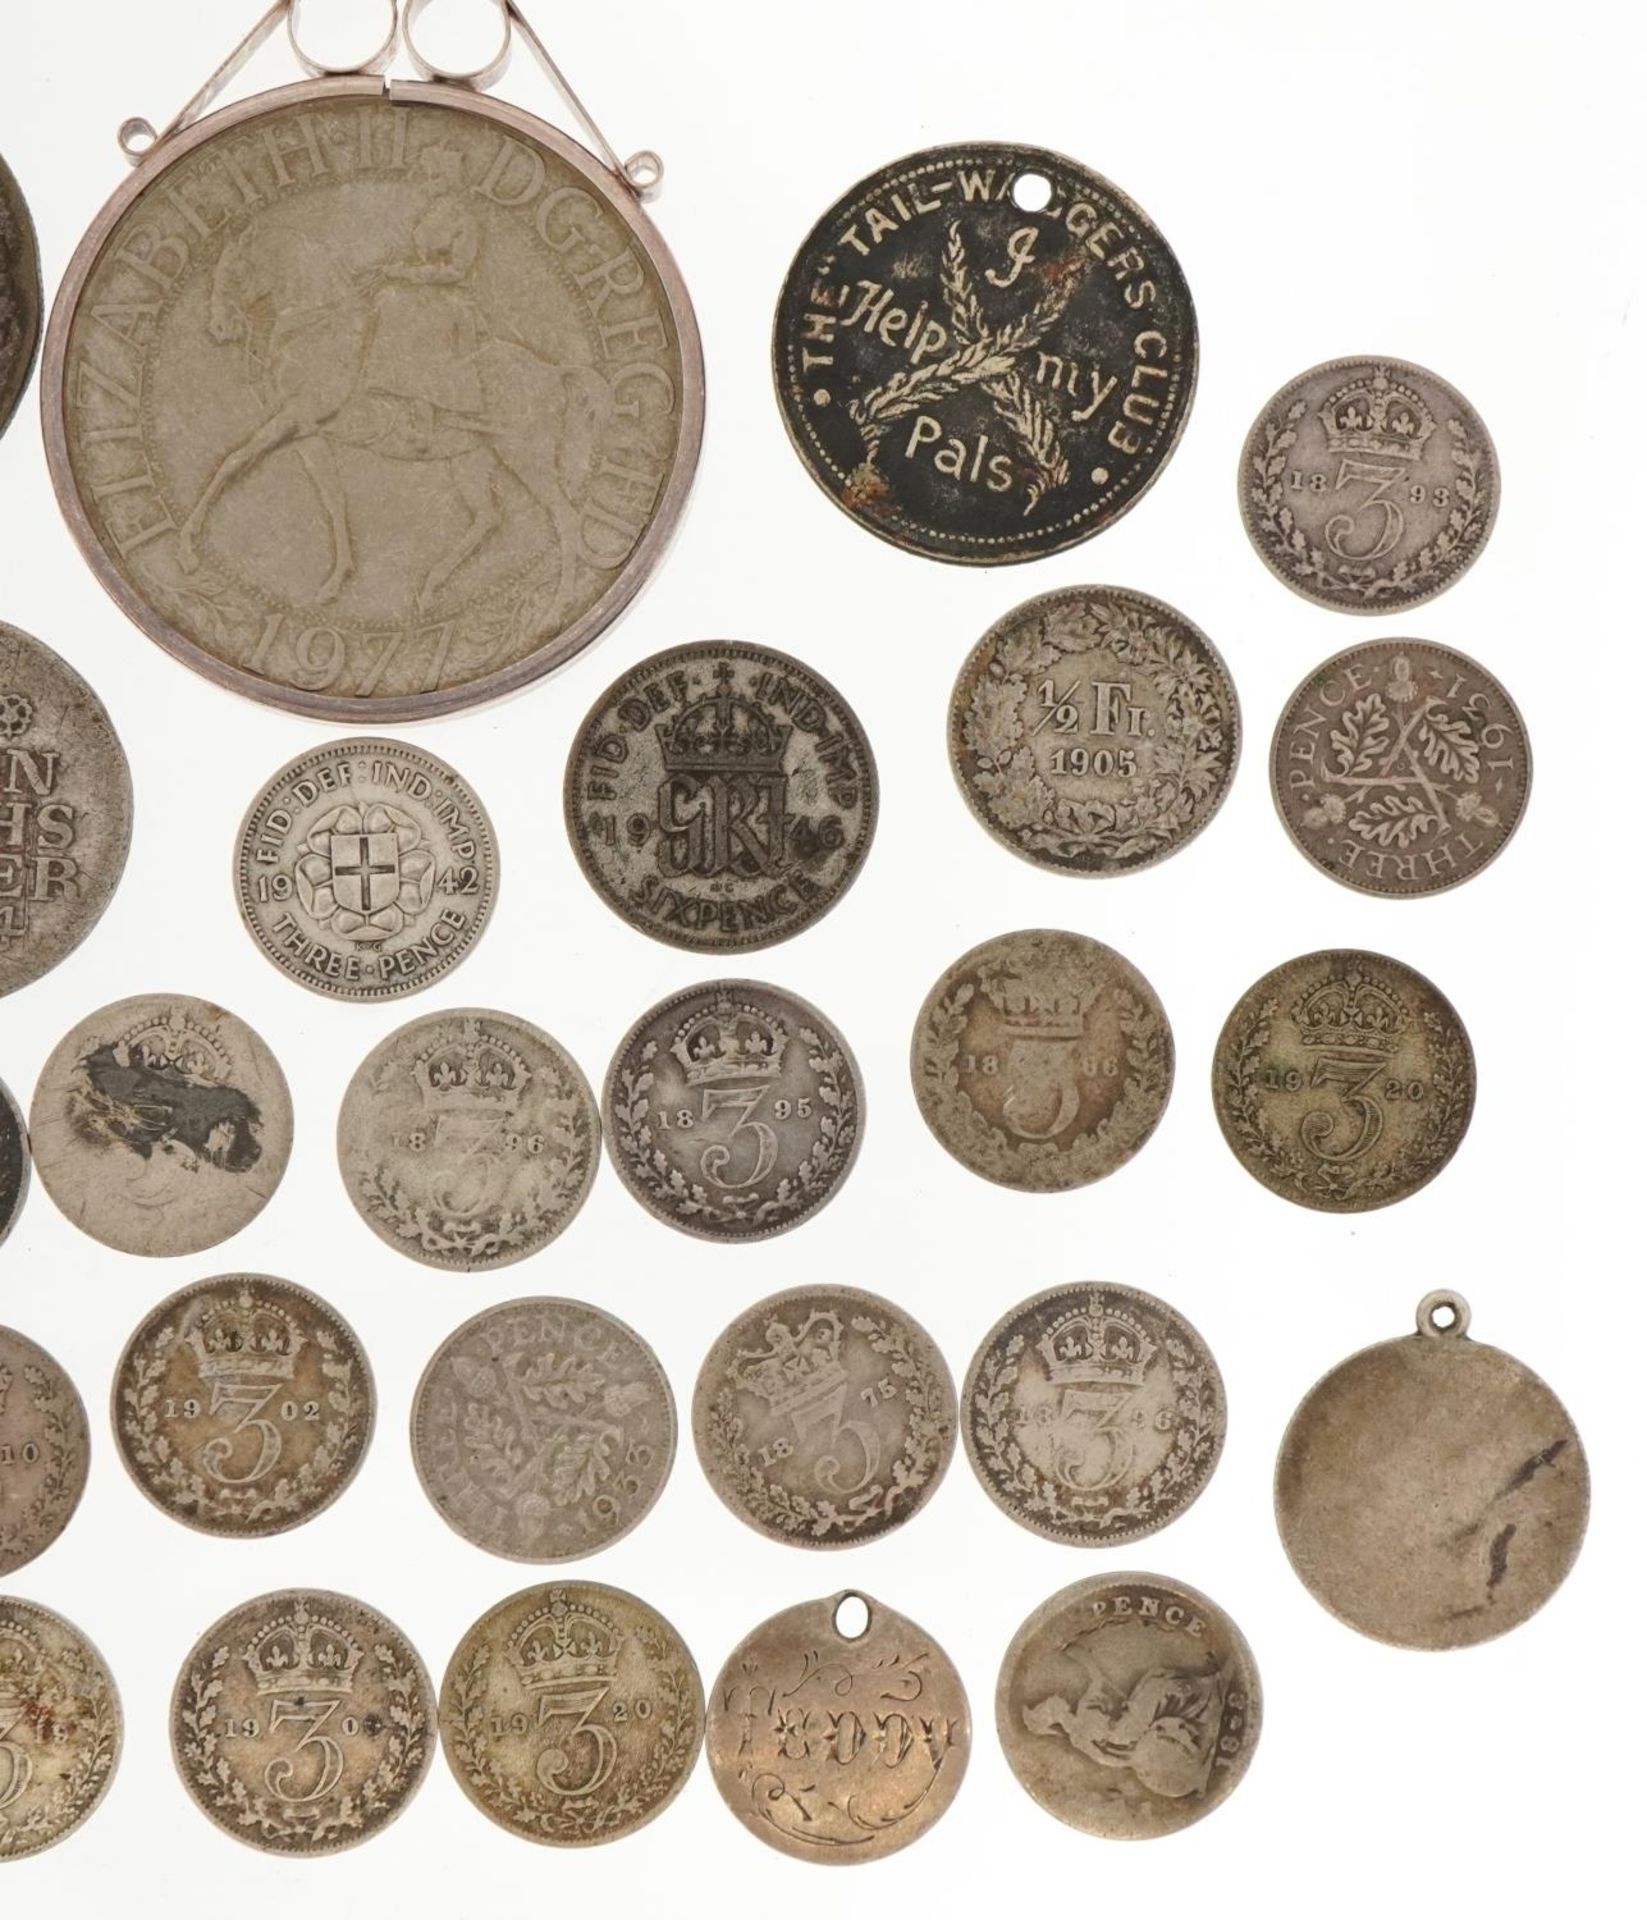 Antique and later British and world coinage, some silver, including 1977 commemorative crown with - Image 3 of 6